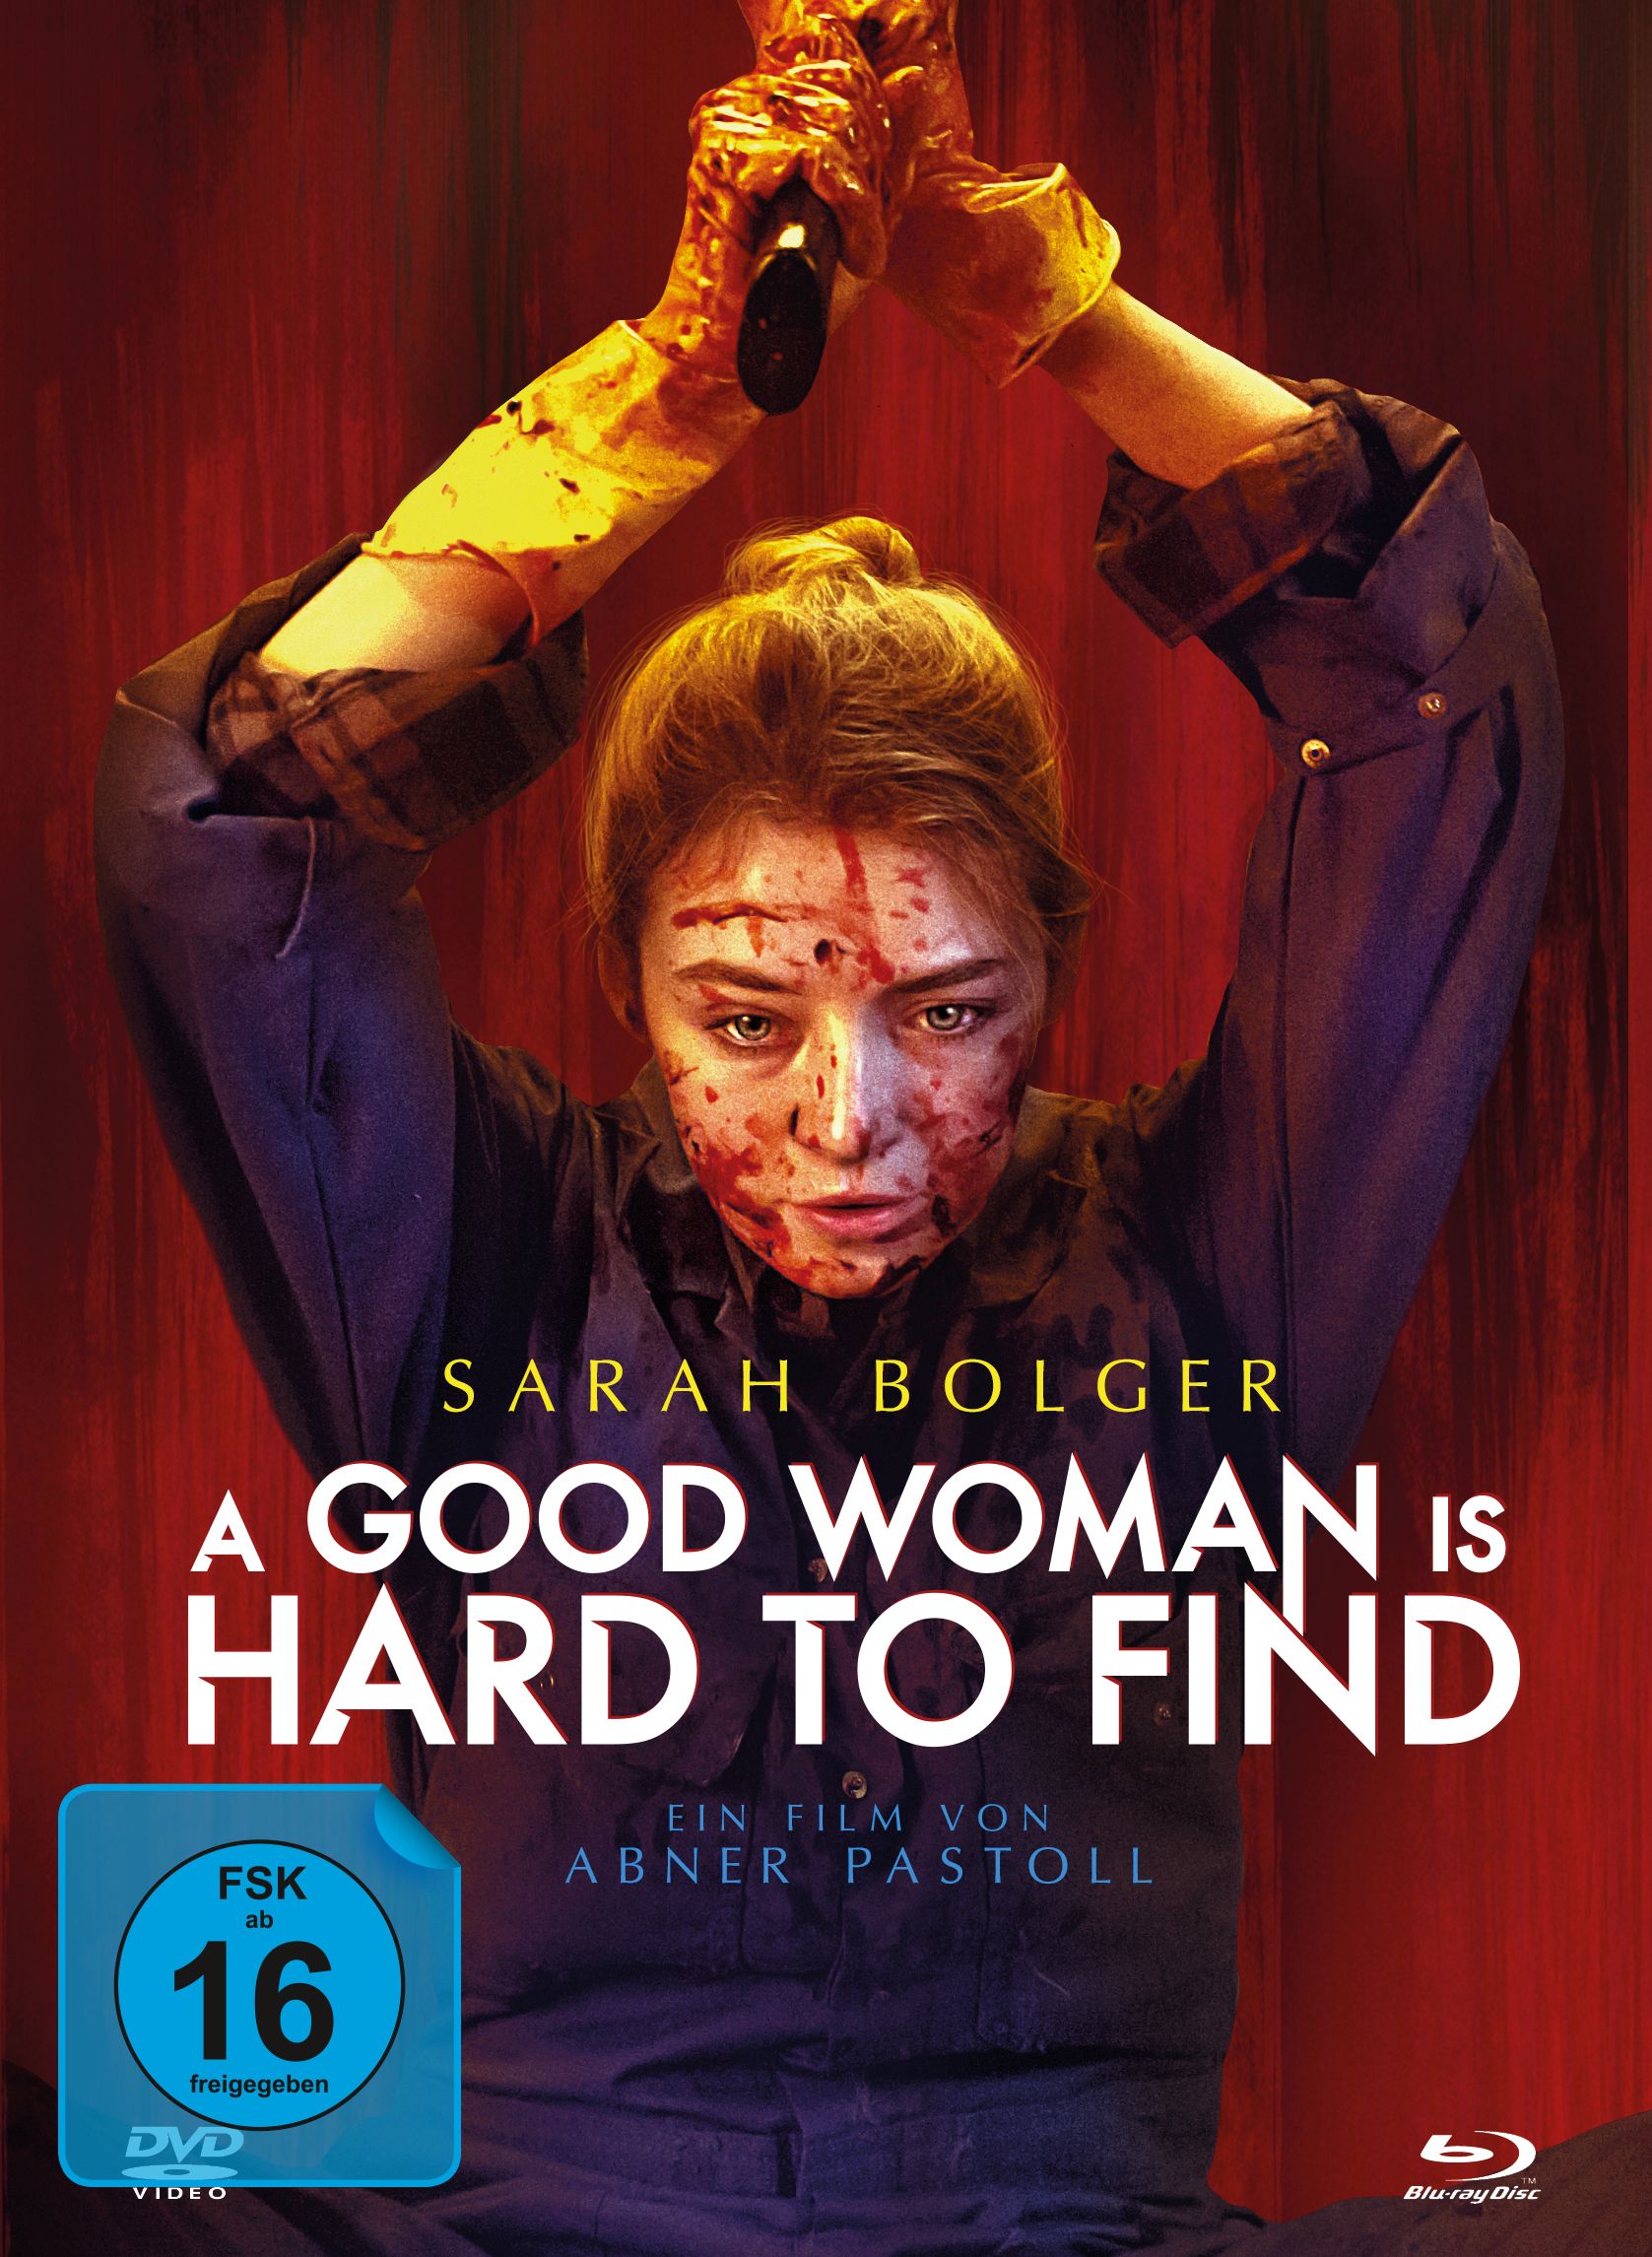 A Good Woman Is Hard to Find - 2-Disc Limited Collector's Edition im Mediabook (Blu-ray + DVD)